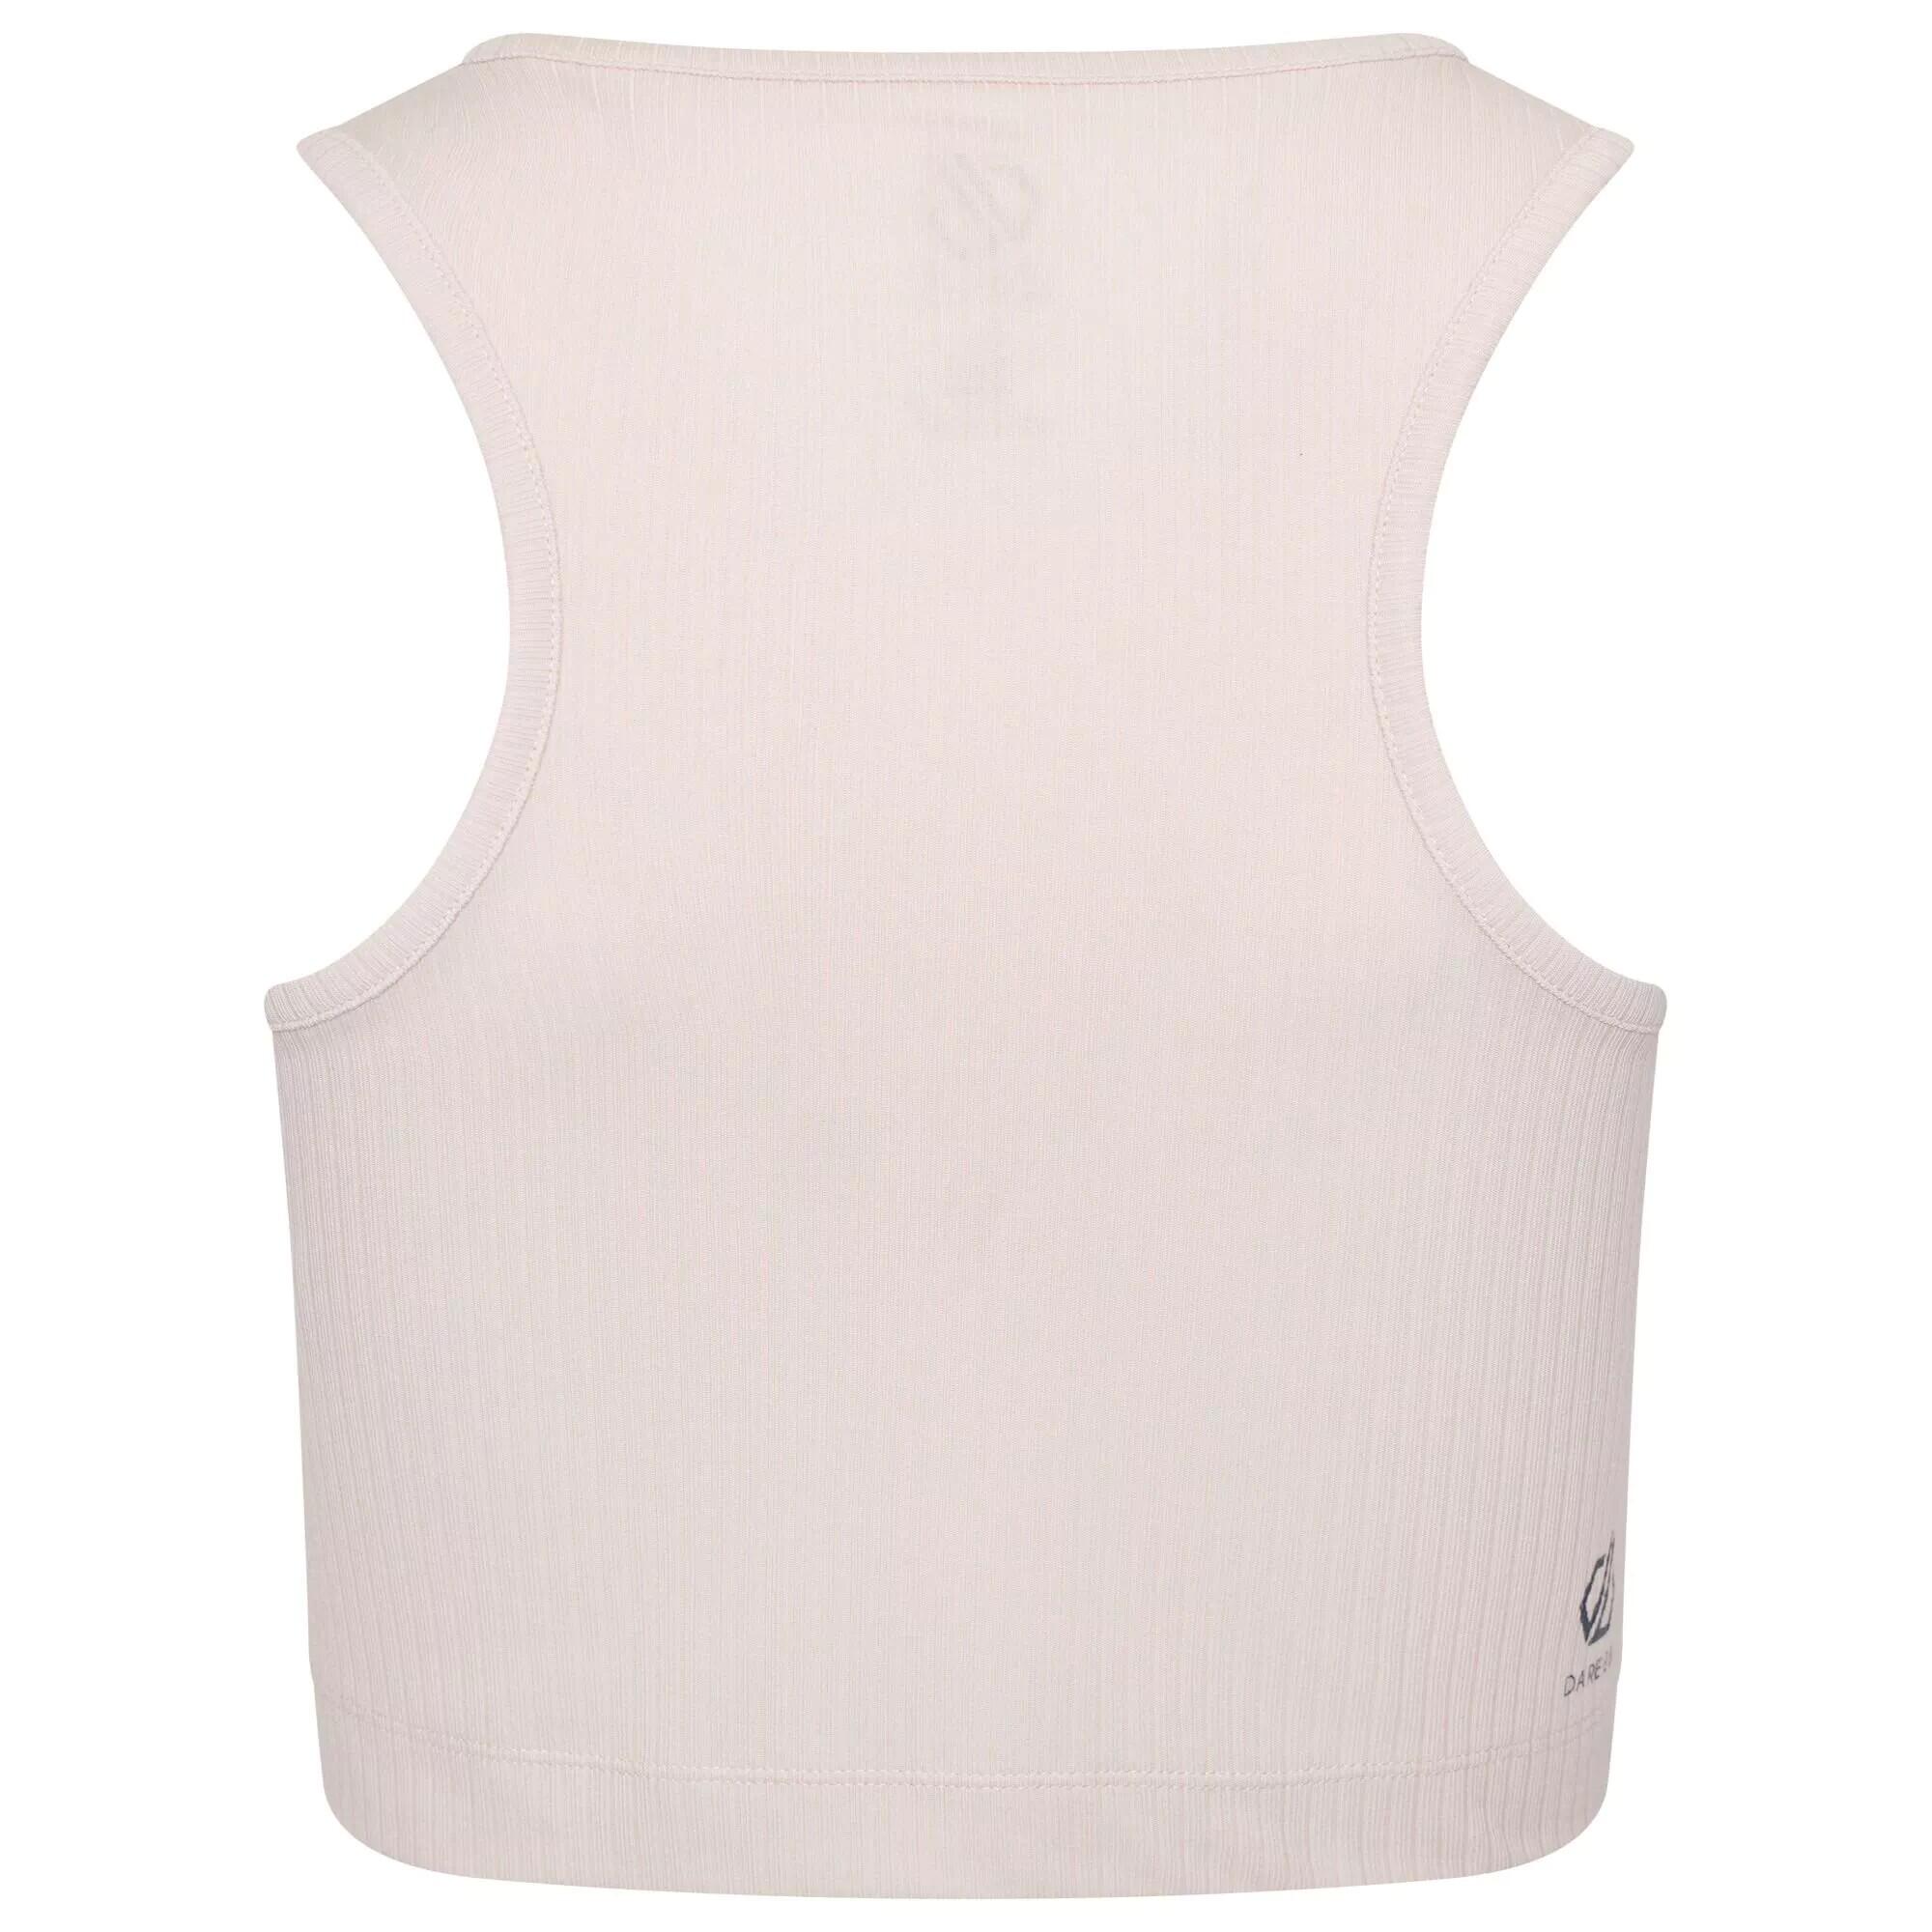 Womens/Ladies Lounge About Crop Top (Barley White) 2/5